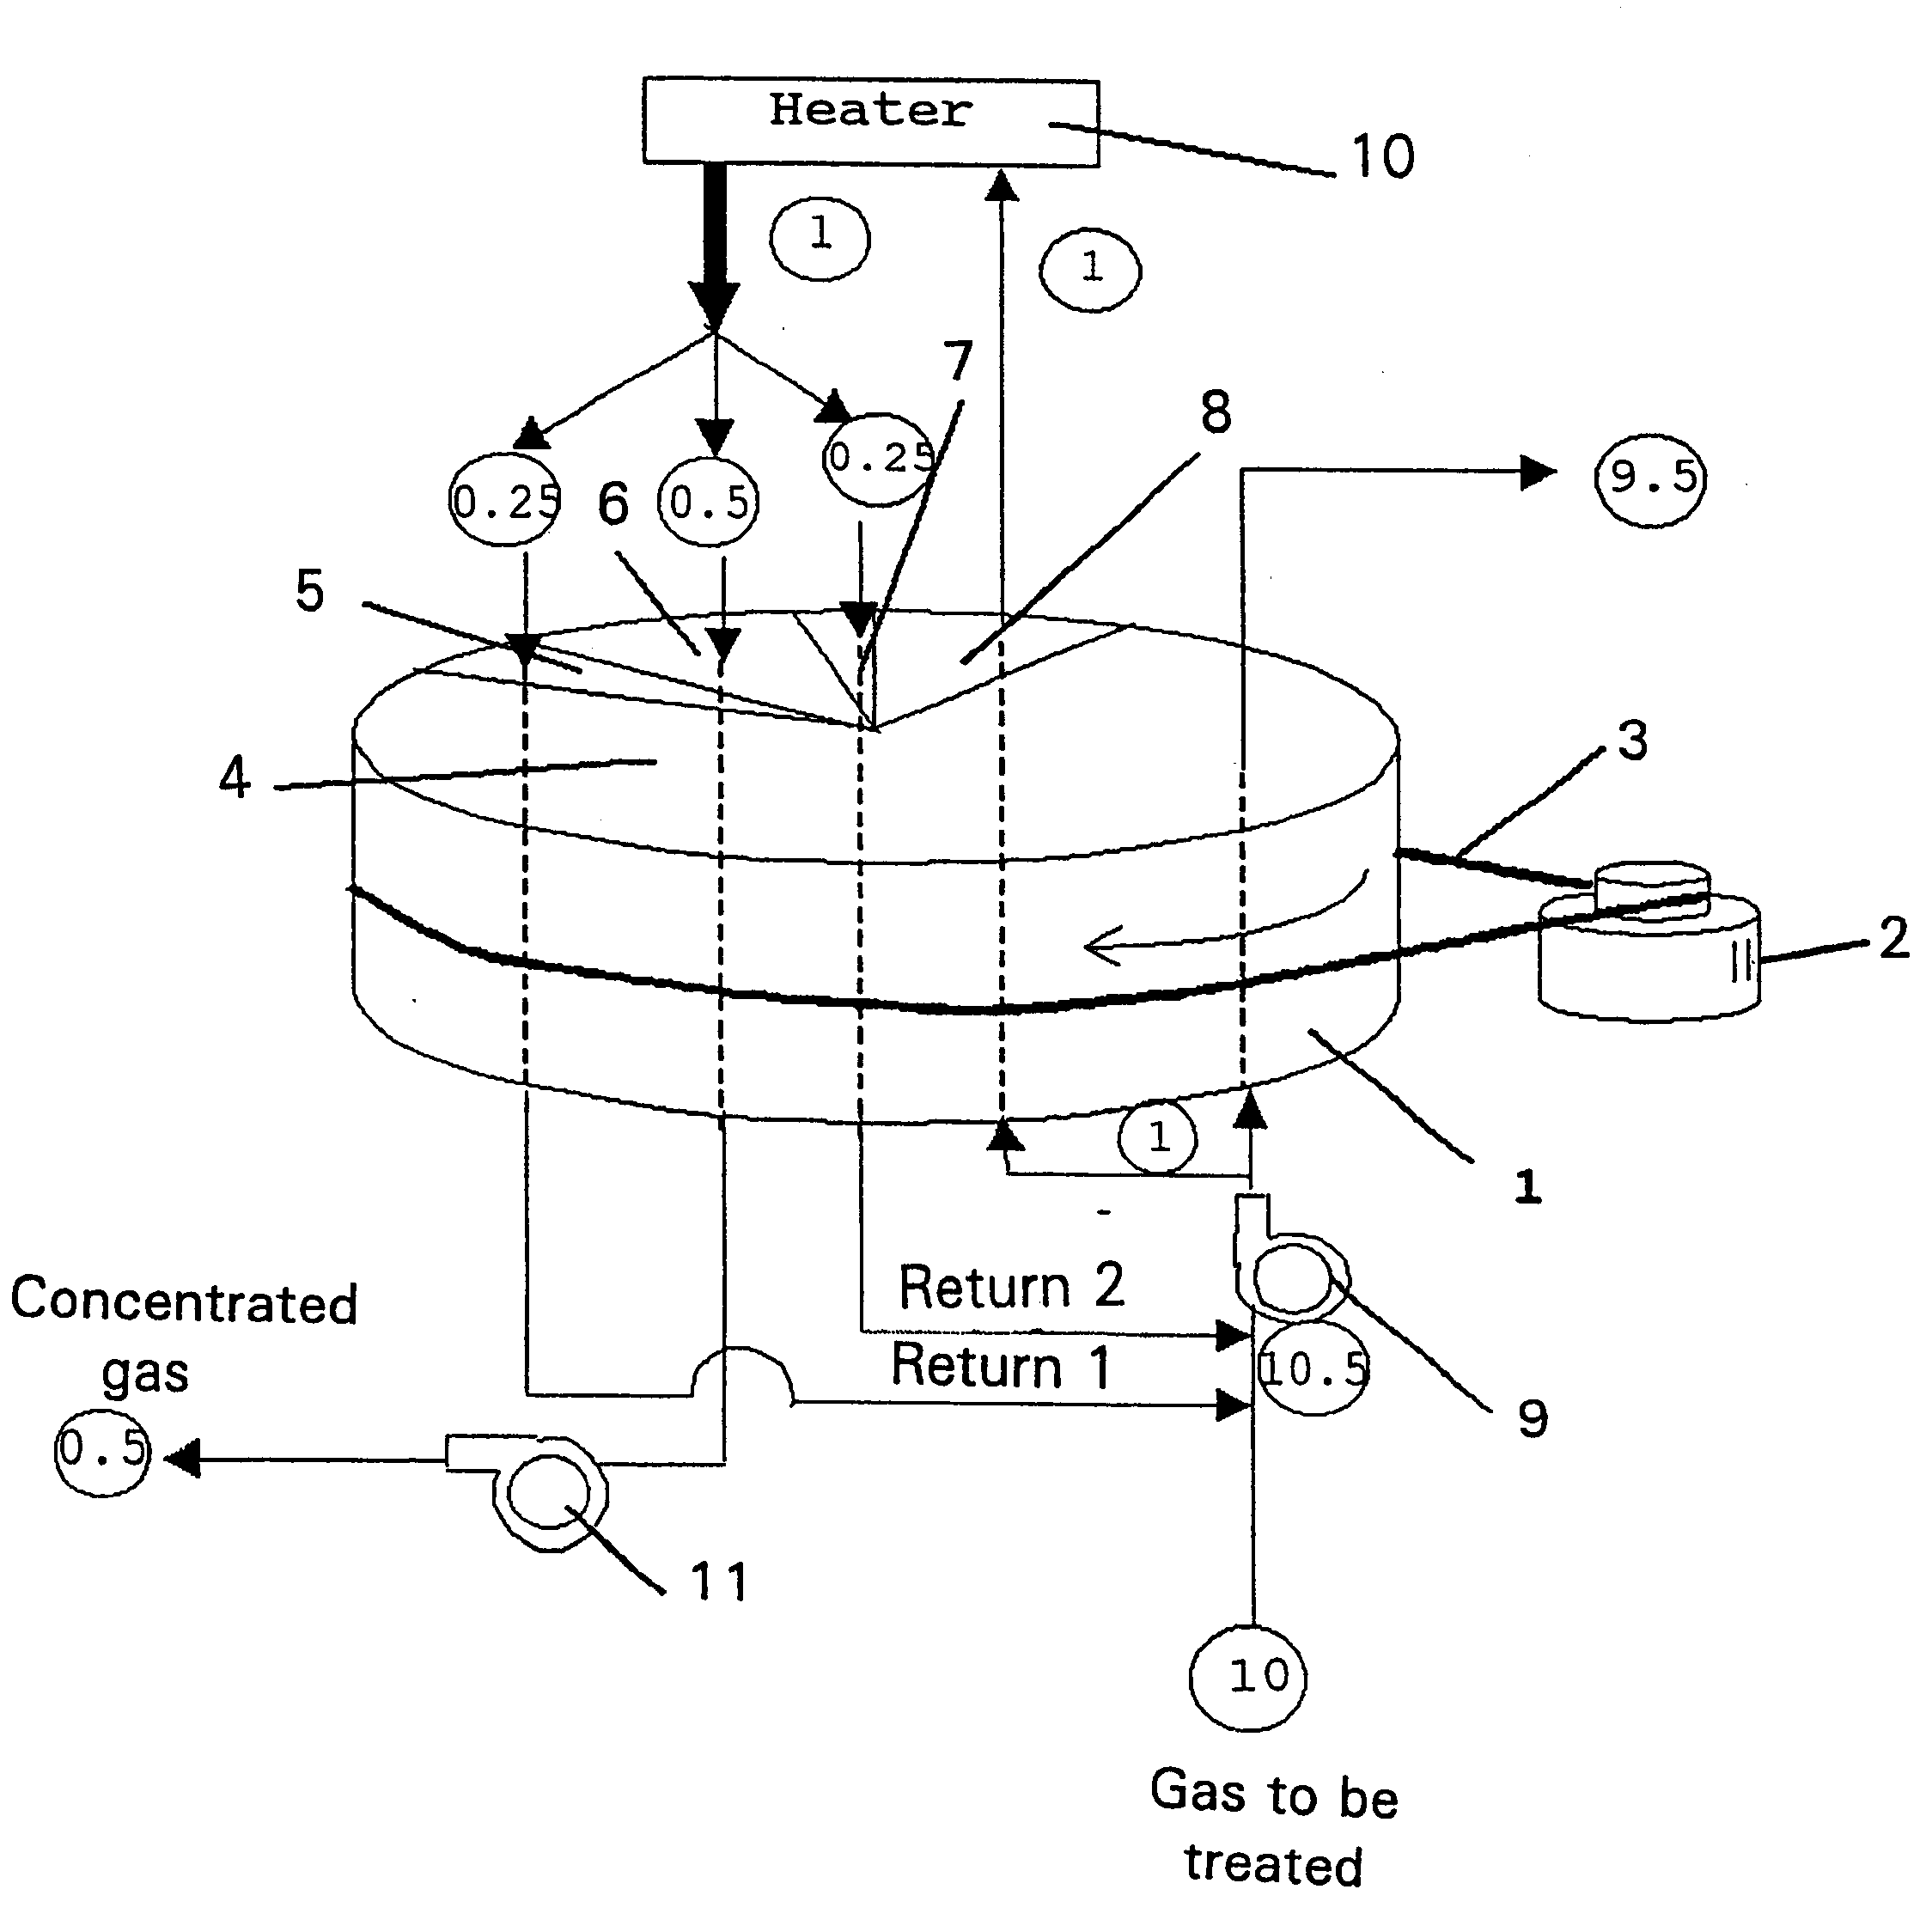 Apparatus and method for treating gas using a honeycomb rotor having a plurality of desorbing zones